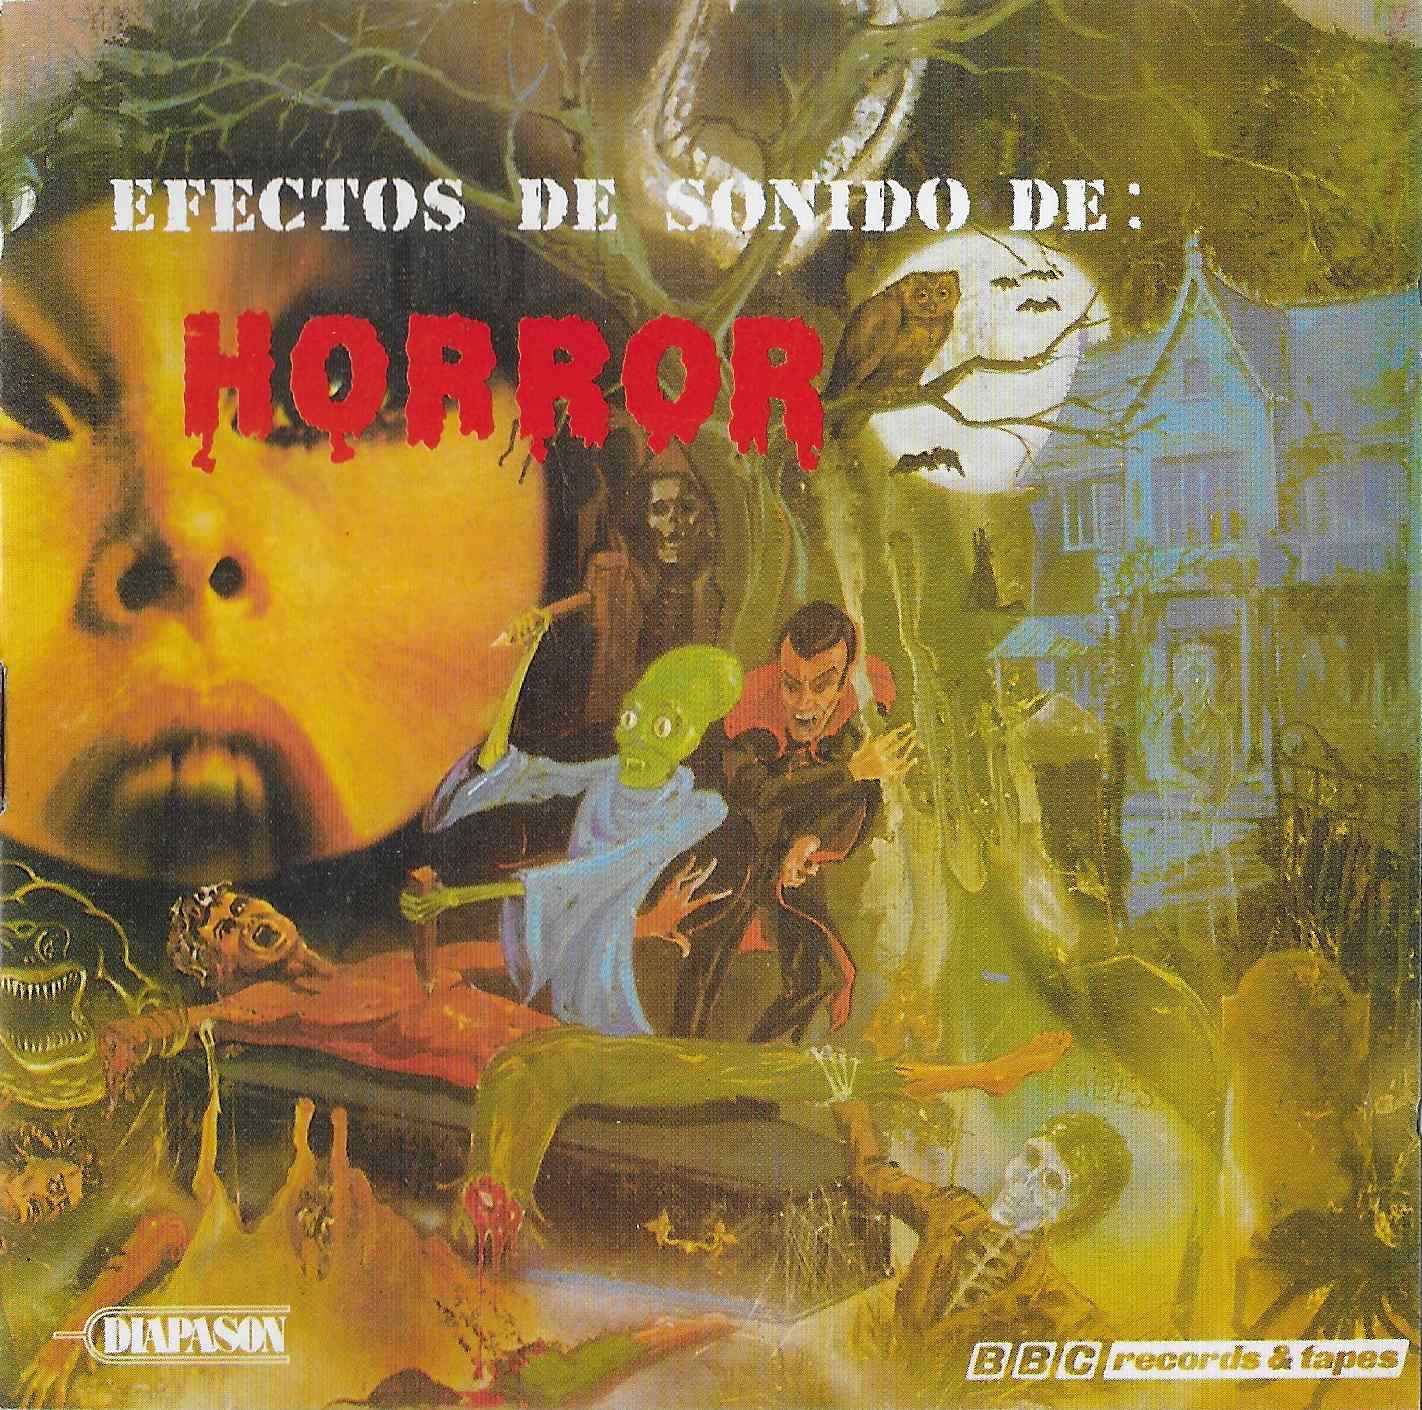 Picture of 95 0030 Efectos de sonido de horror (Spanish import) by artist Various from the BBC cds - Records and Tapes library